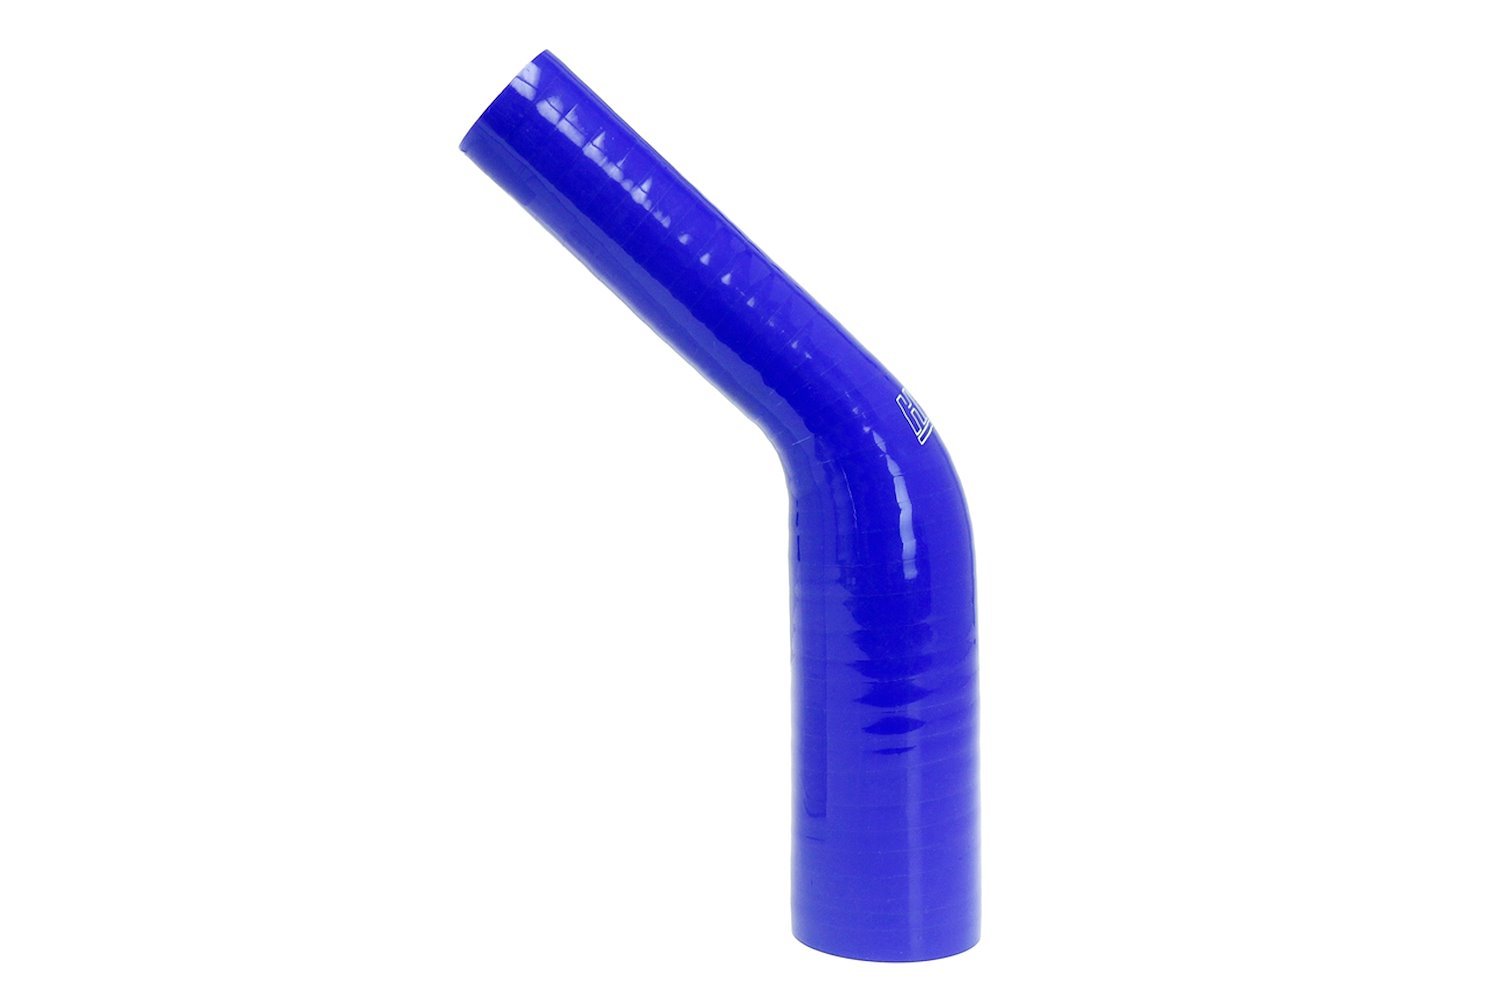 HTSER45-100-150-BLUE Silicone 45-Degree Elbow Hose, High-Temp 4-Ply Reinforced, 1 in. - 1-1/2 in. ID, Blue